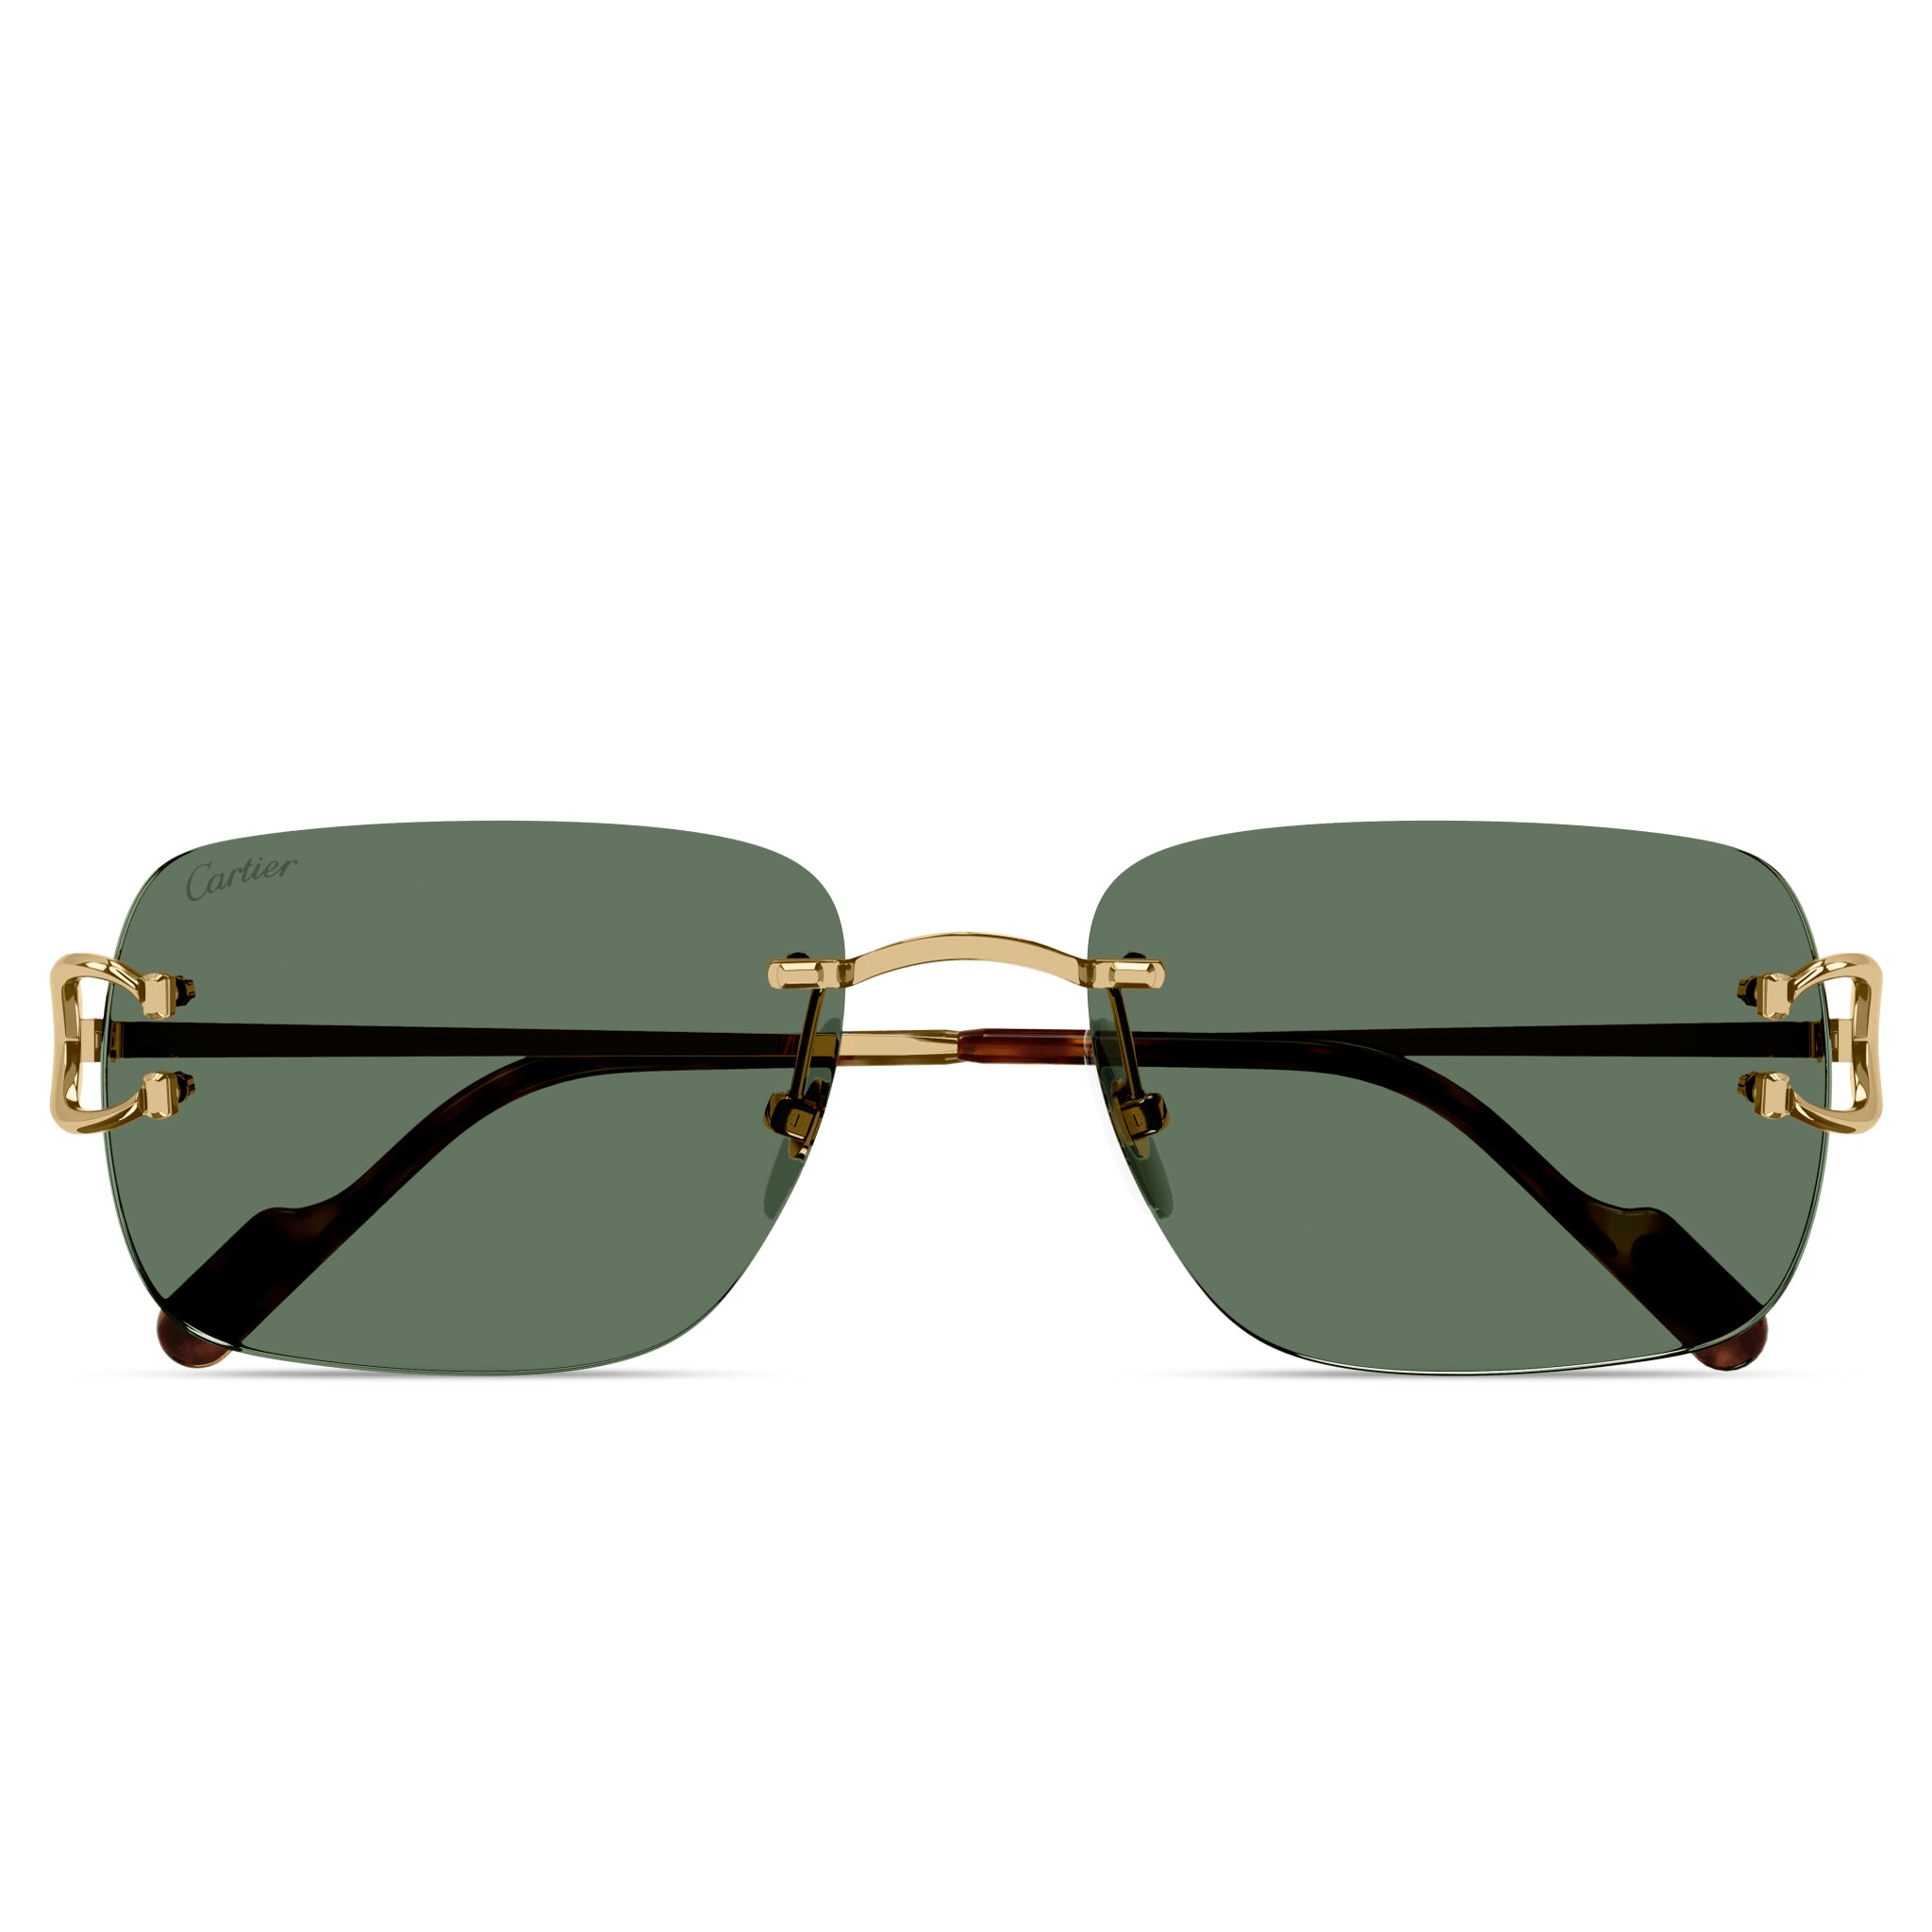 Front view of Cartier Eyewear CT0330S-005 C Decor Gold Green Rimless Sunglasses CT0330S-005